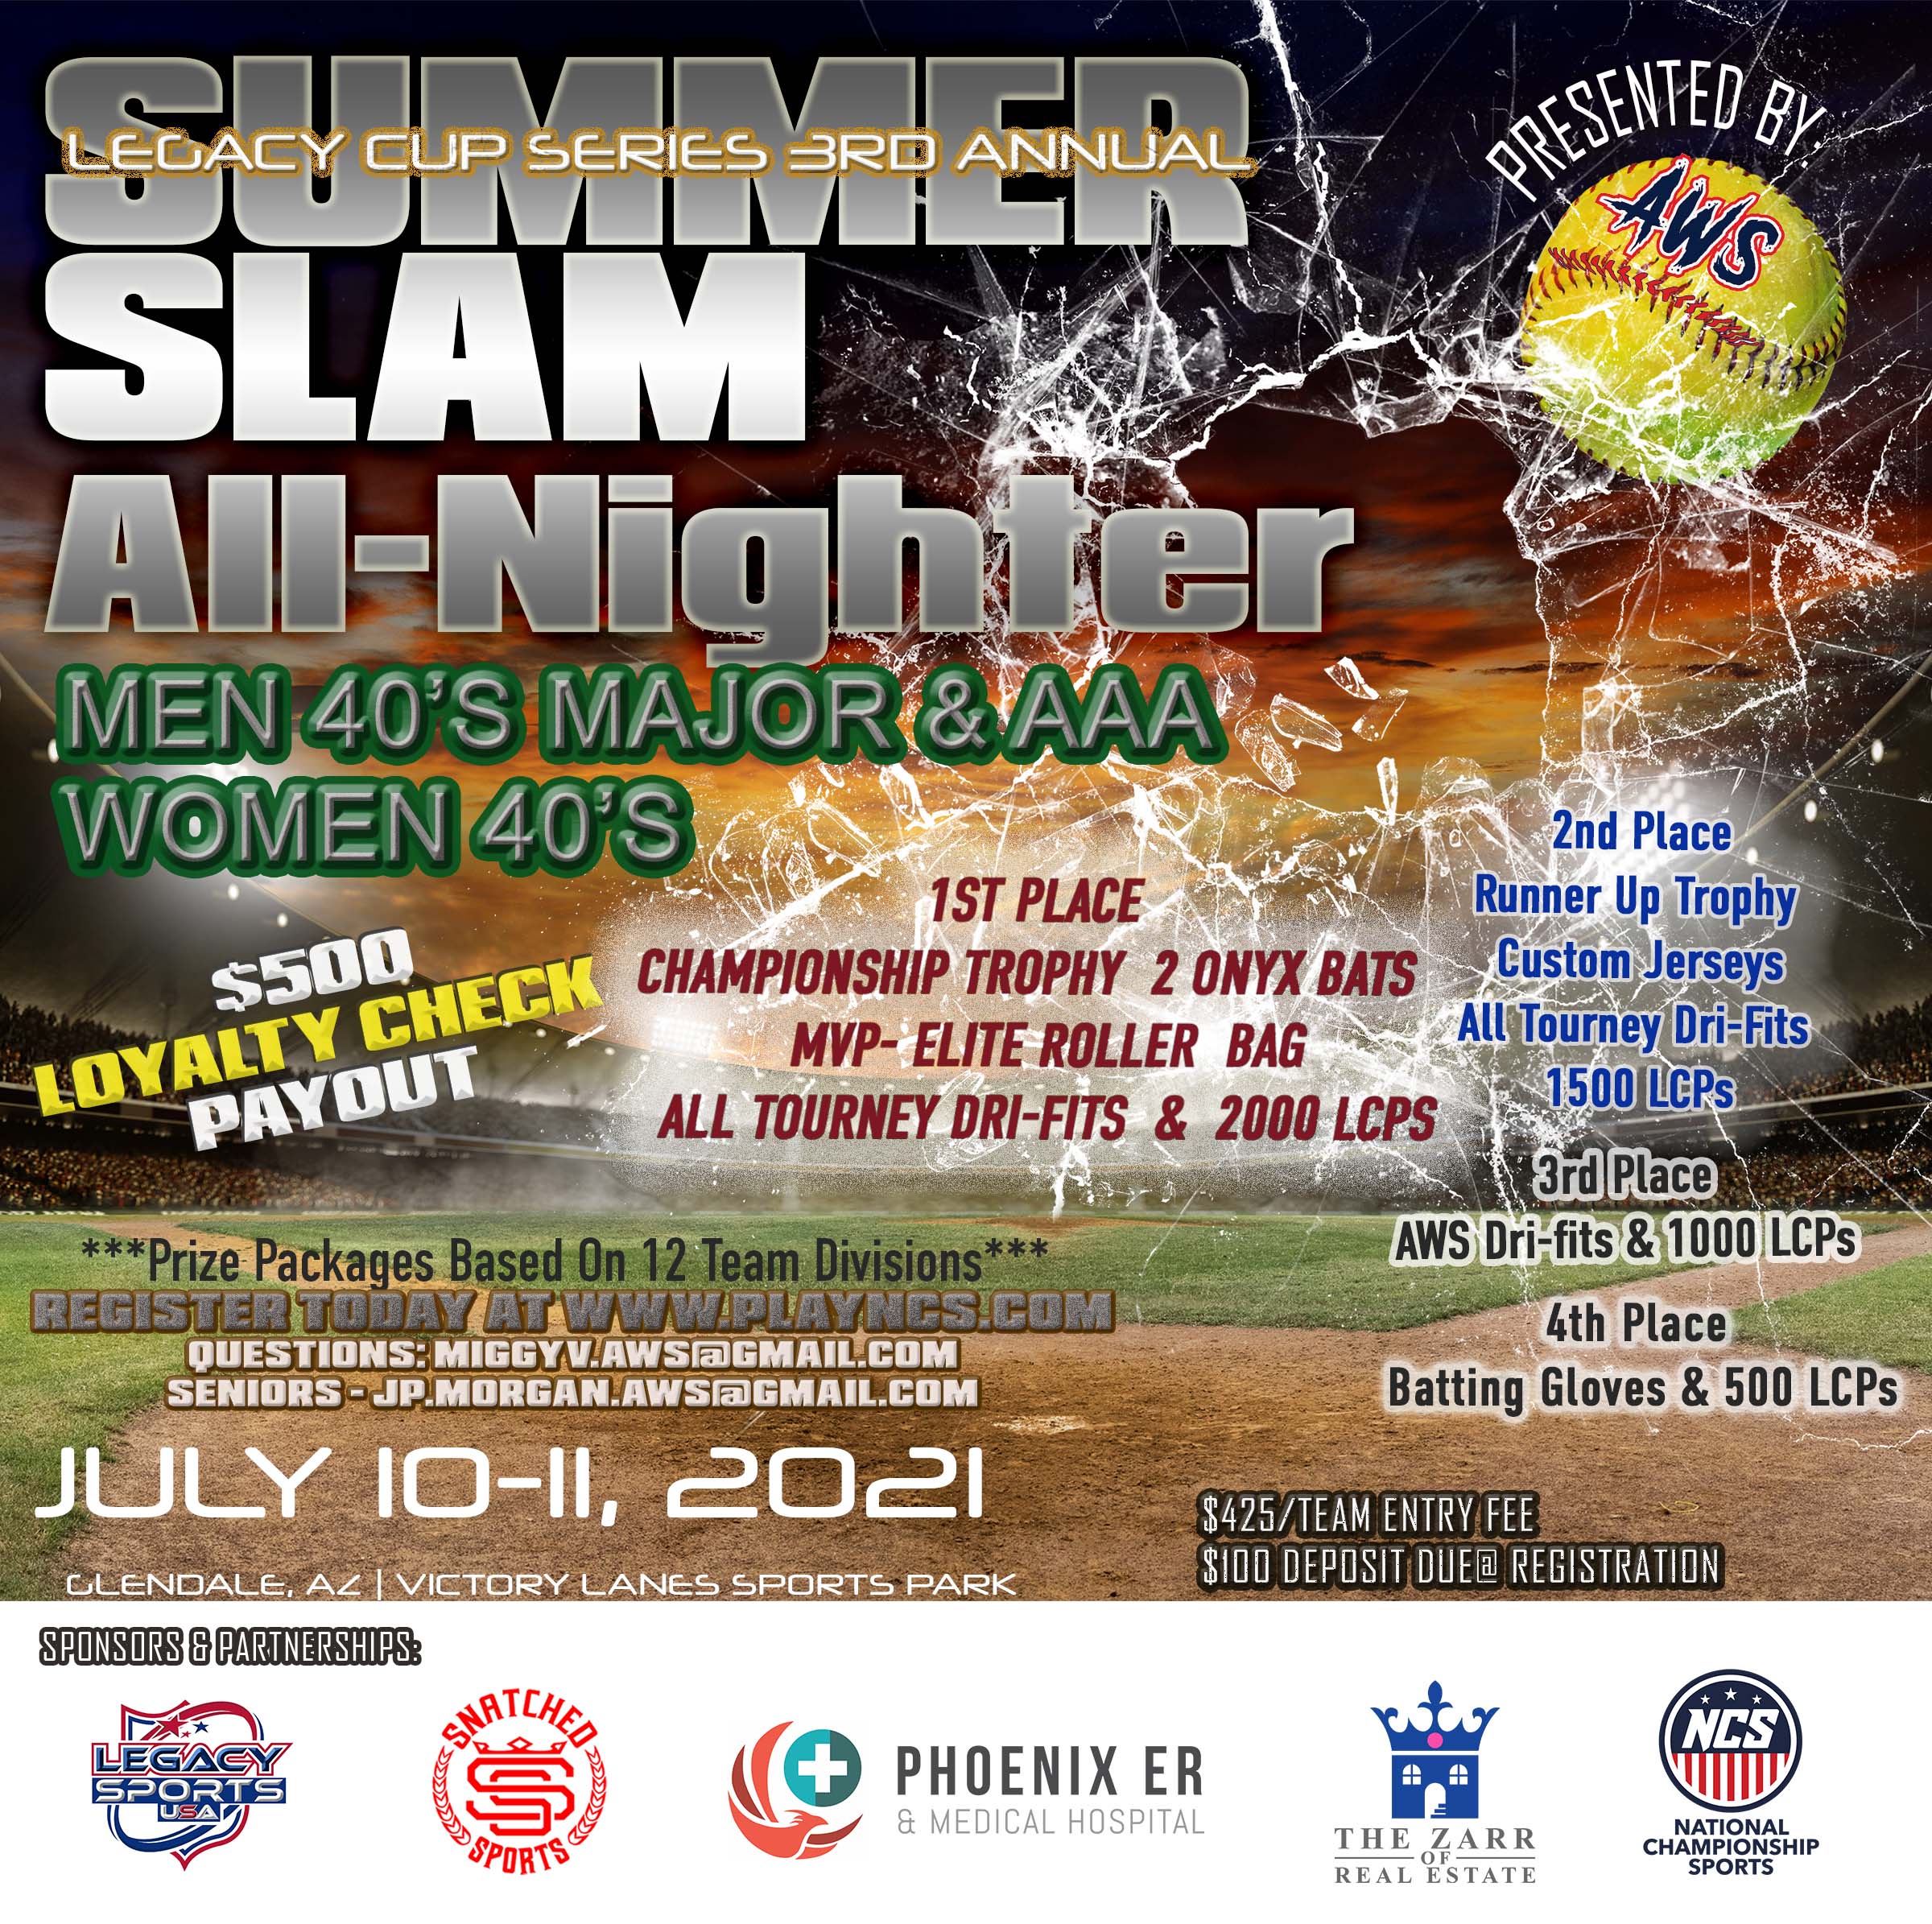 Legacy Cup Series - 3rd Annual - Summer Slam All Nighter Logo